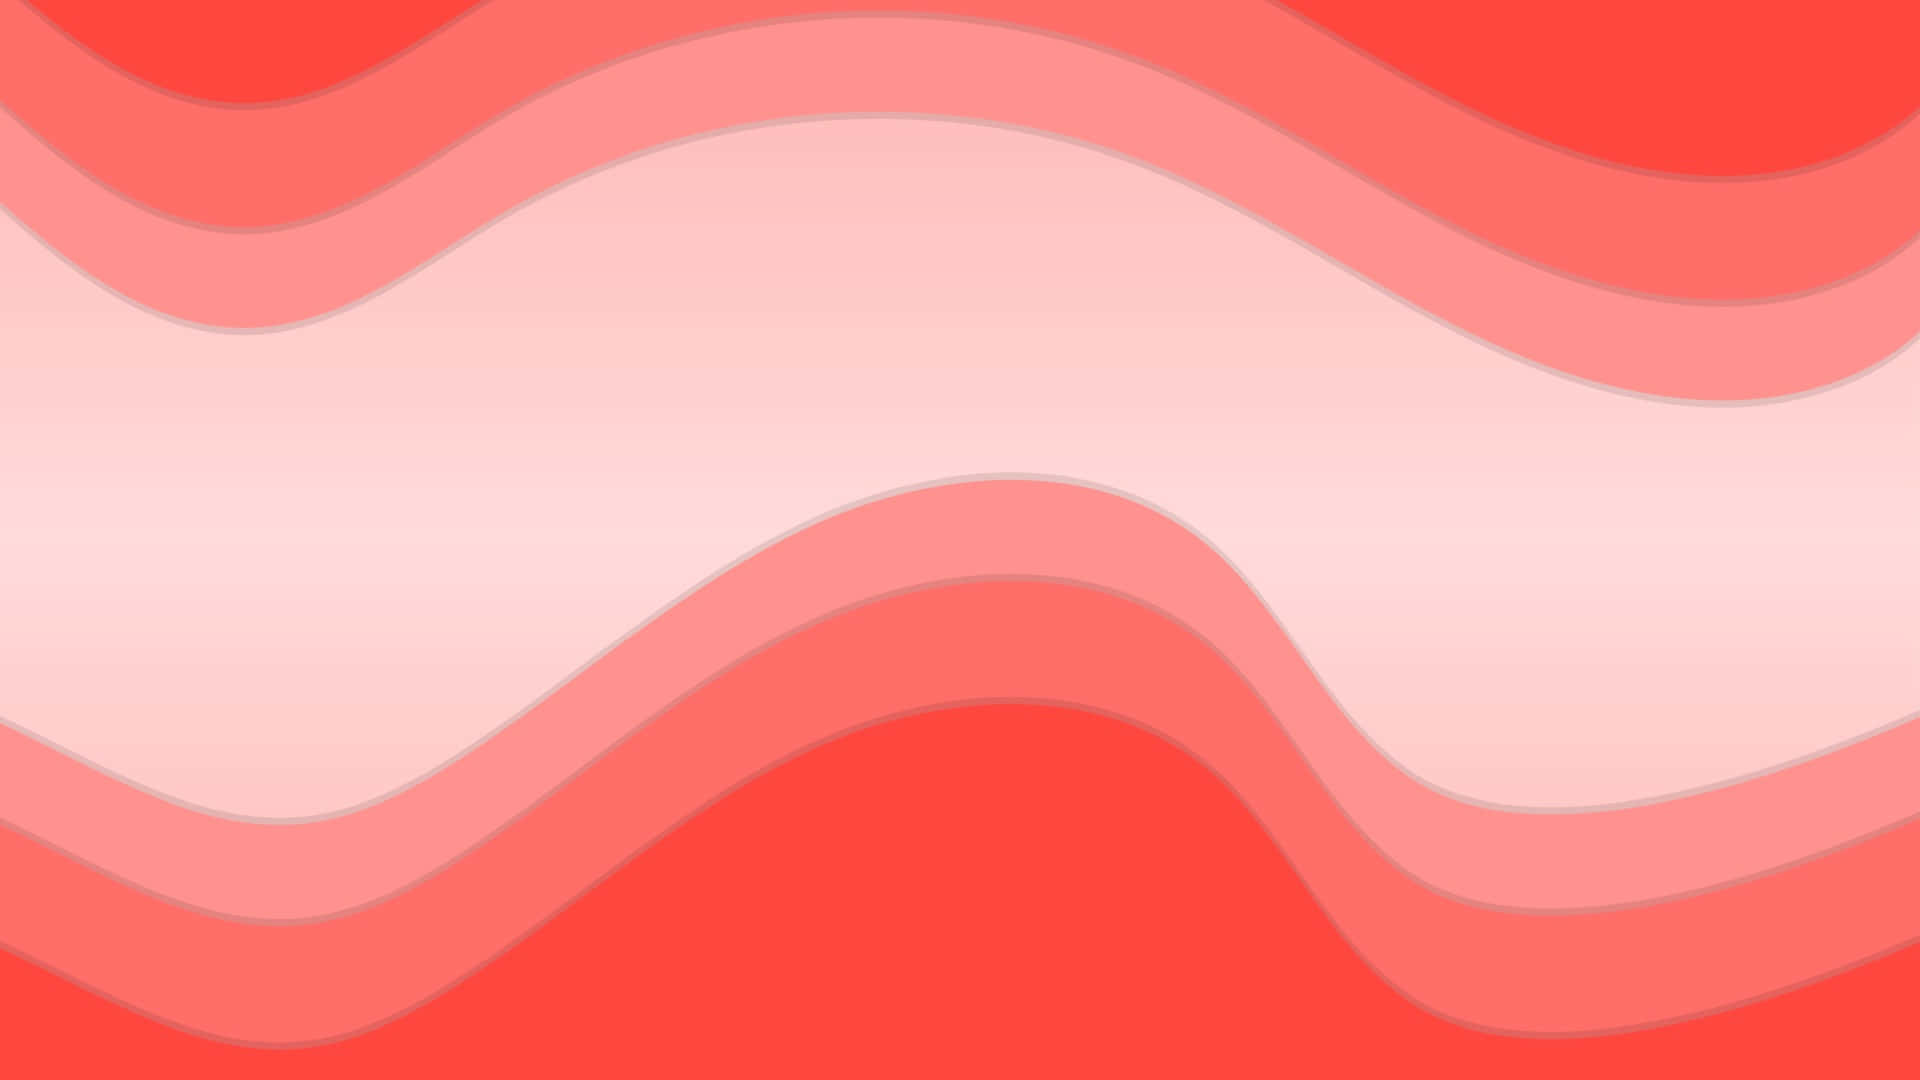 A Pink And White Wavy Background Wallpaper